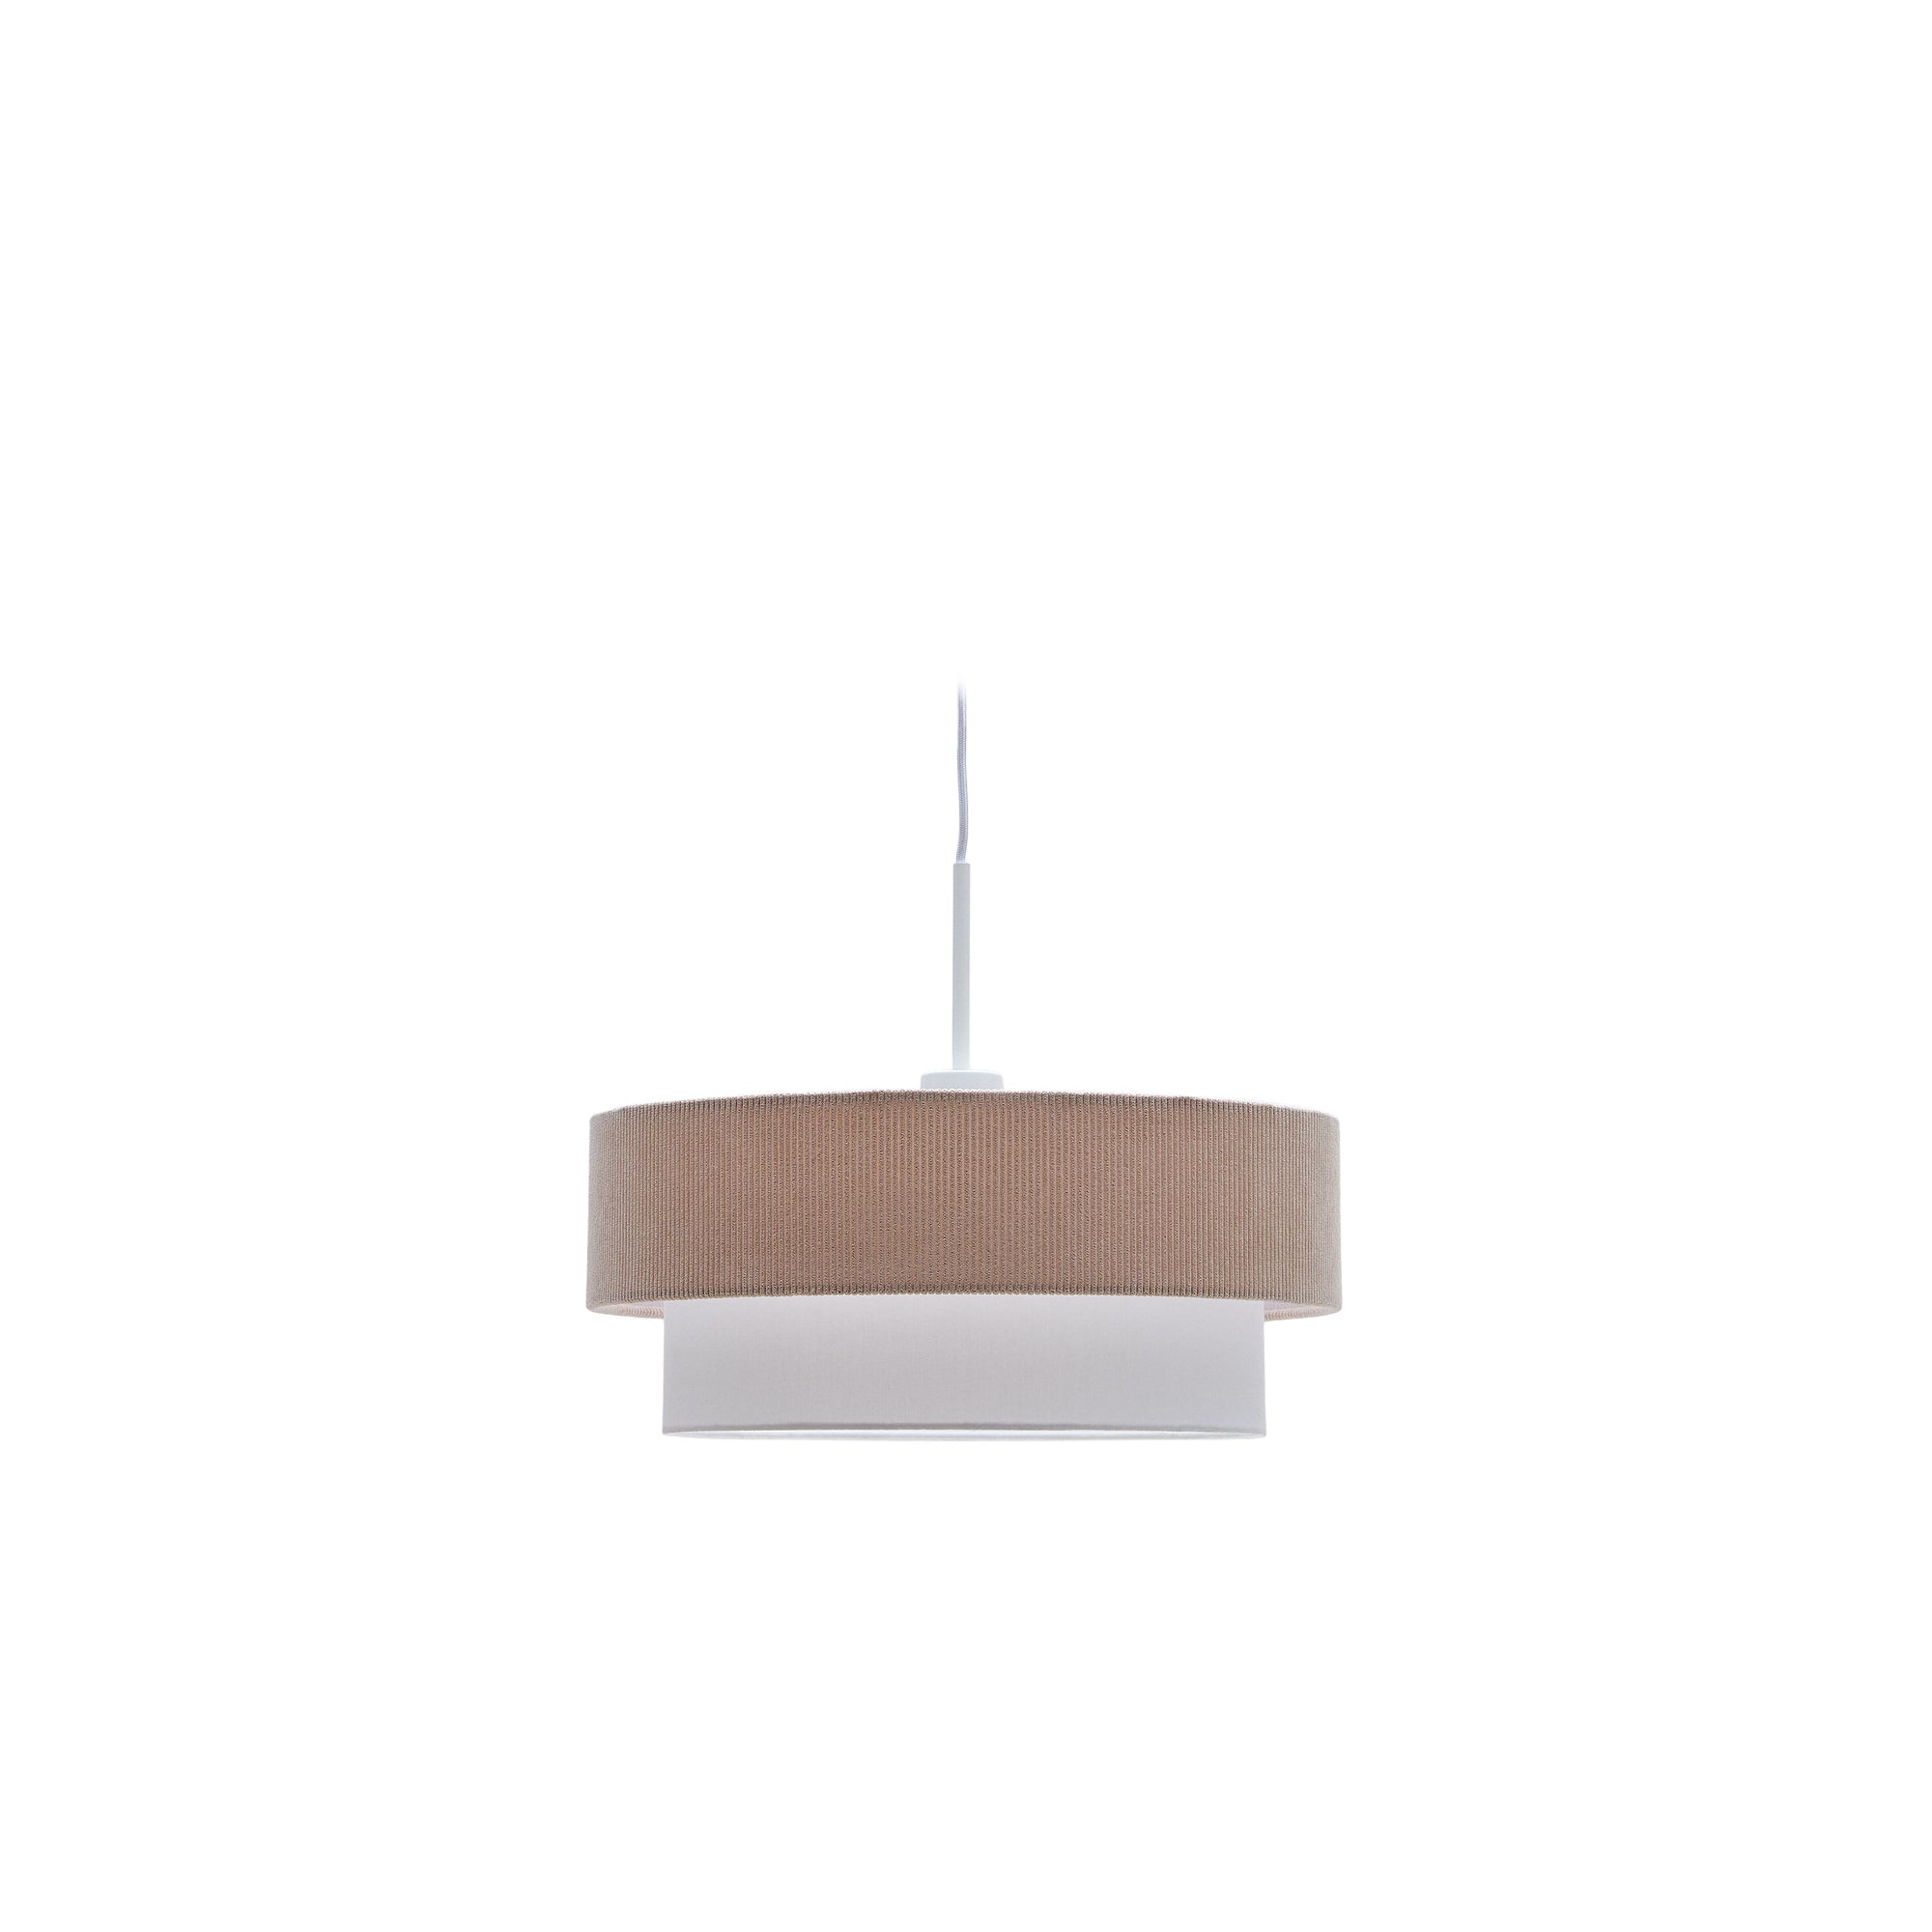 Bianella ceiling lamp in cotton and beige corduroy,  Ø 40 cm.